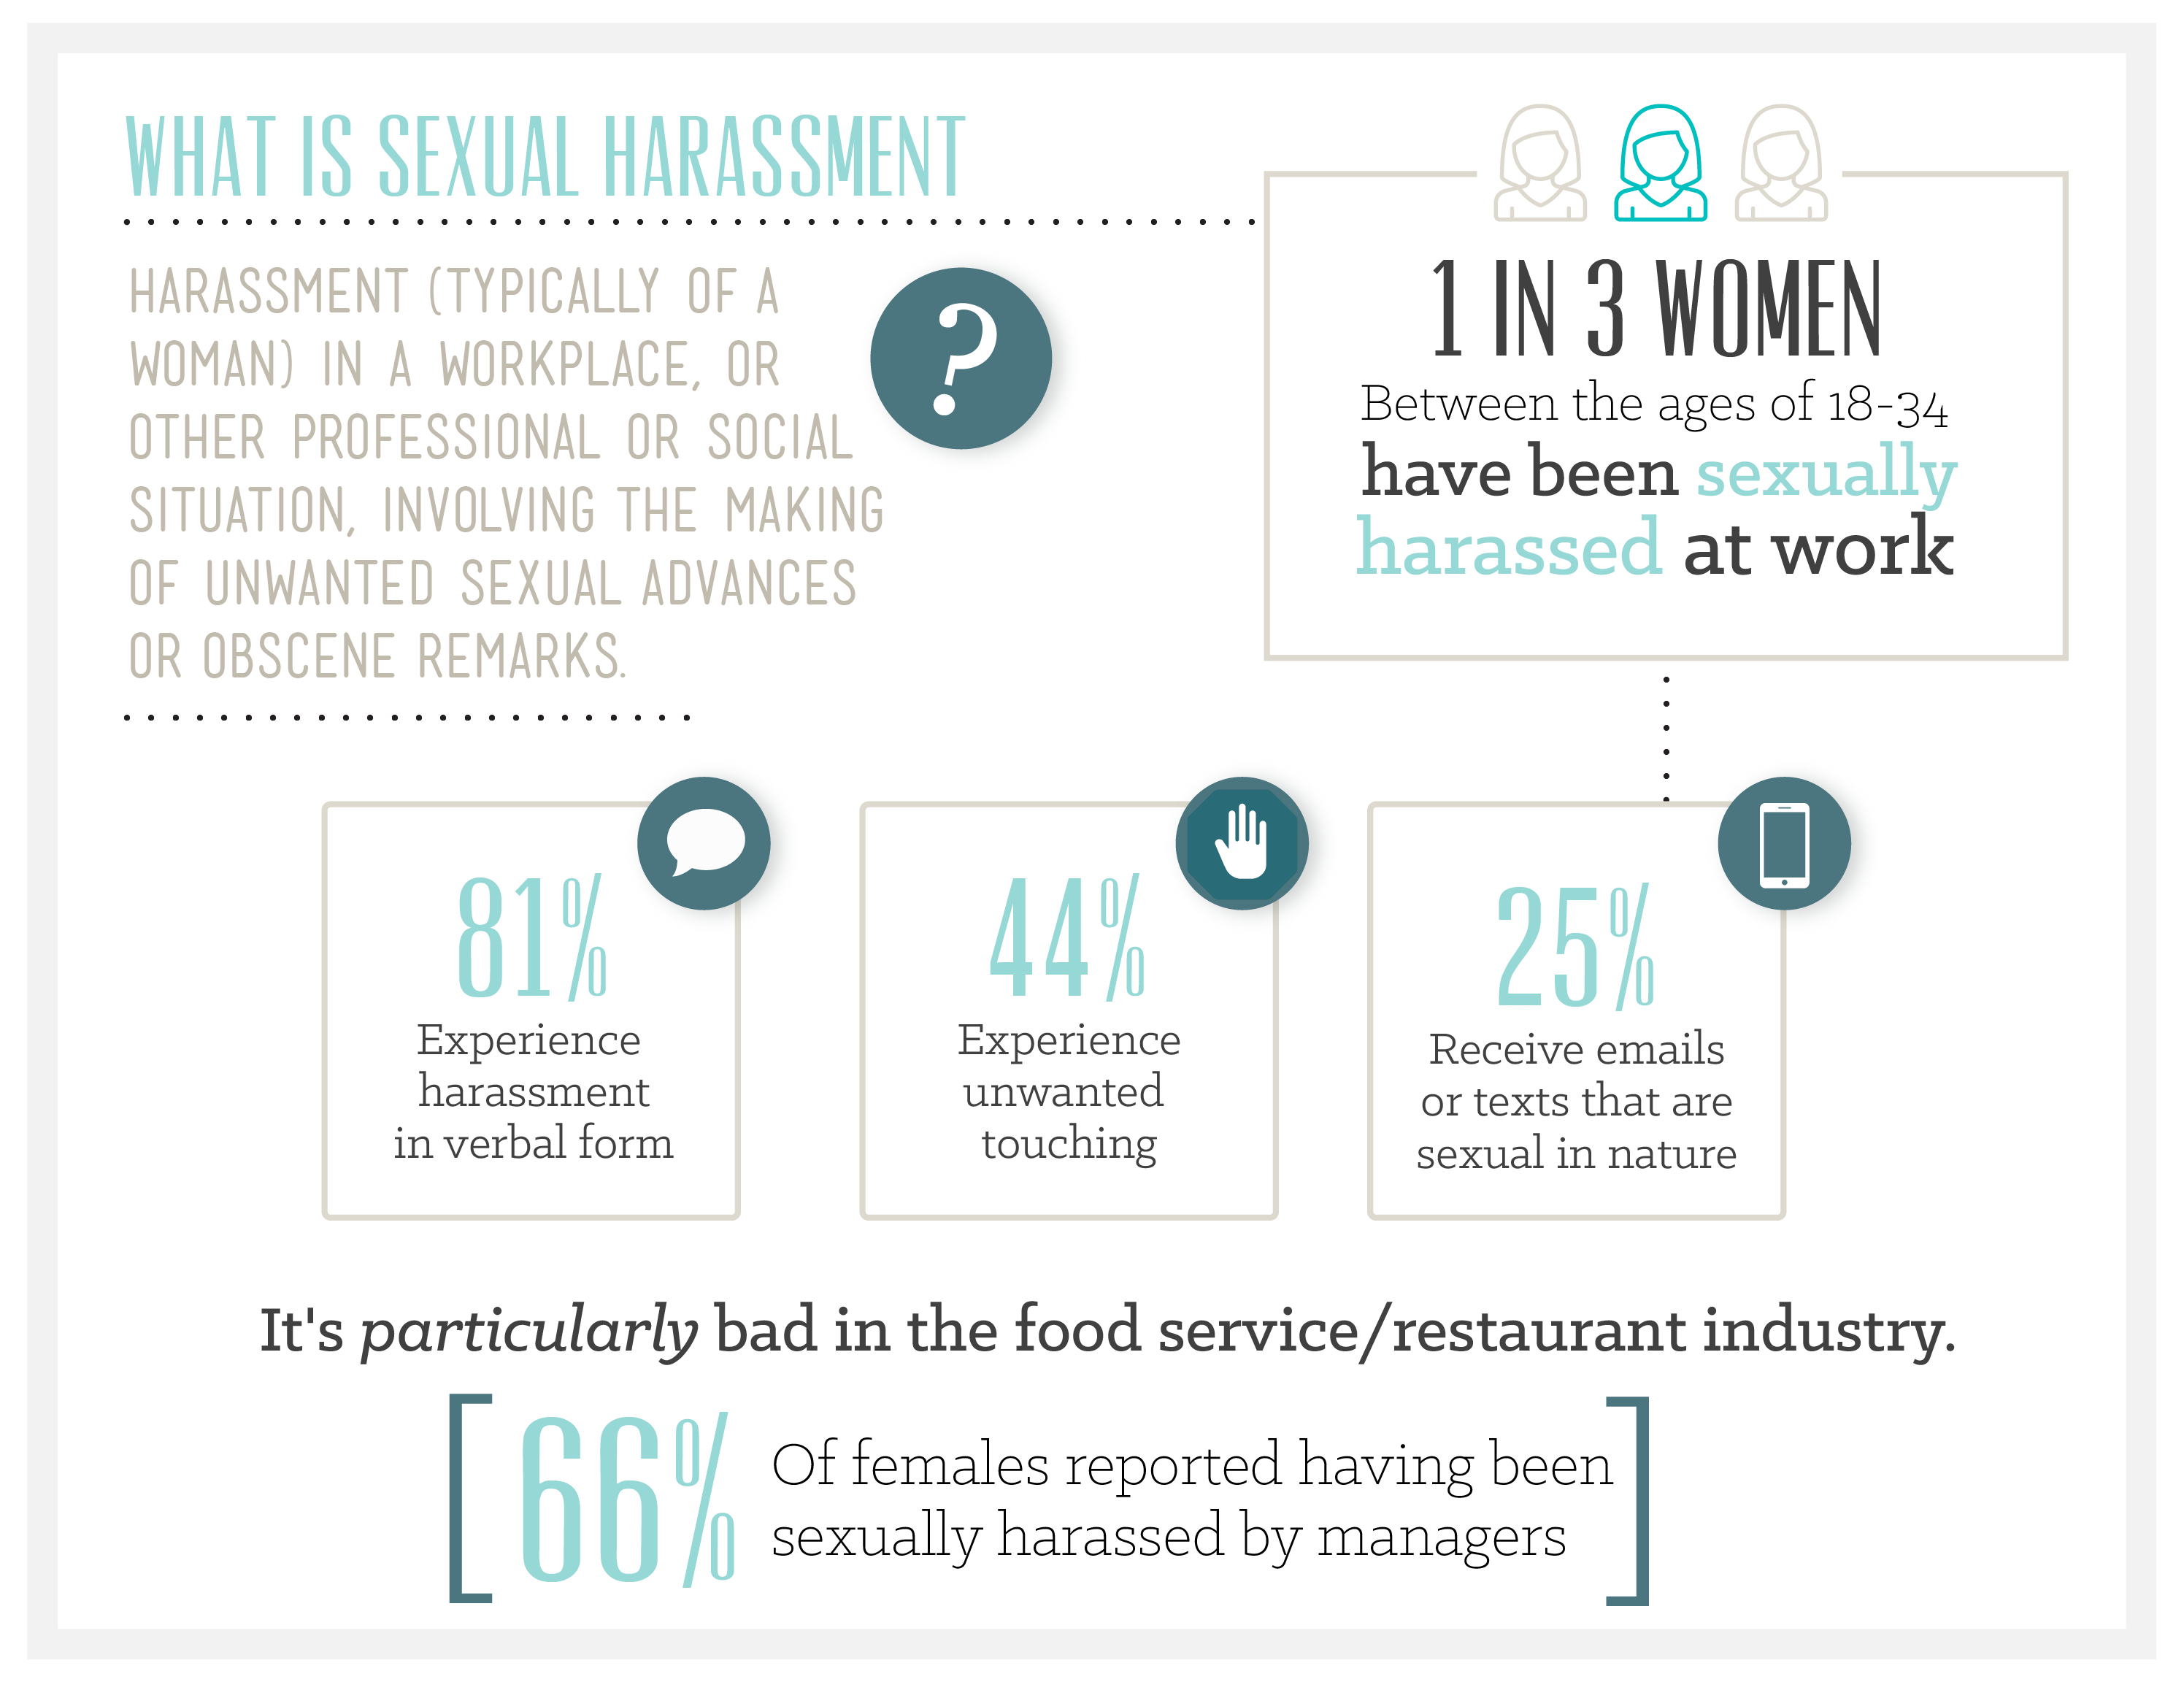 7 Professional Women On Their RealLife Workplace Harassment Horror Story